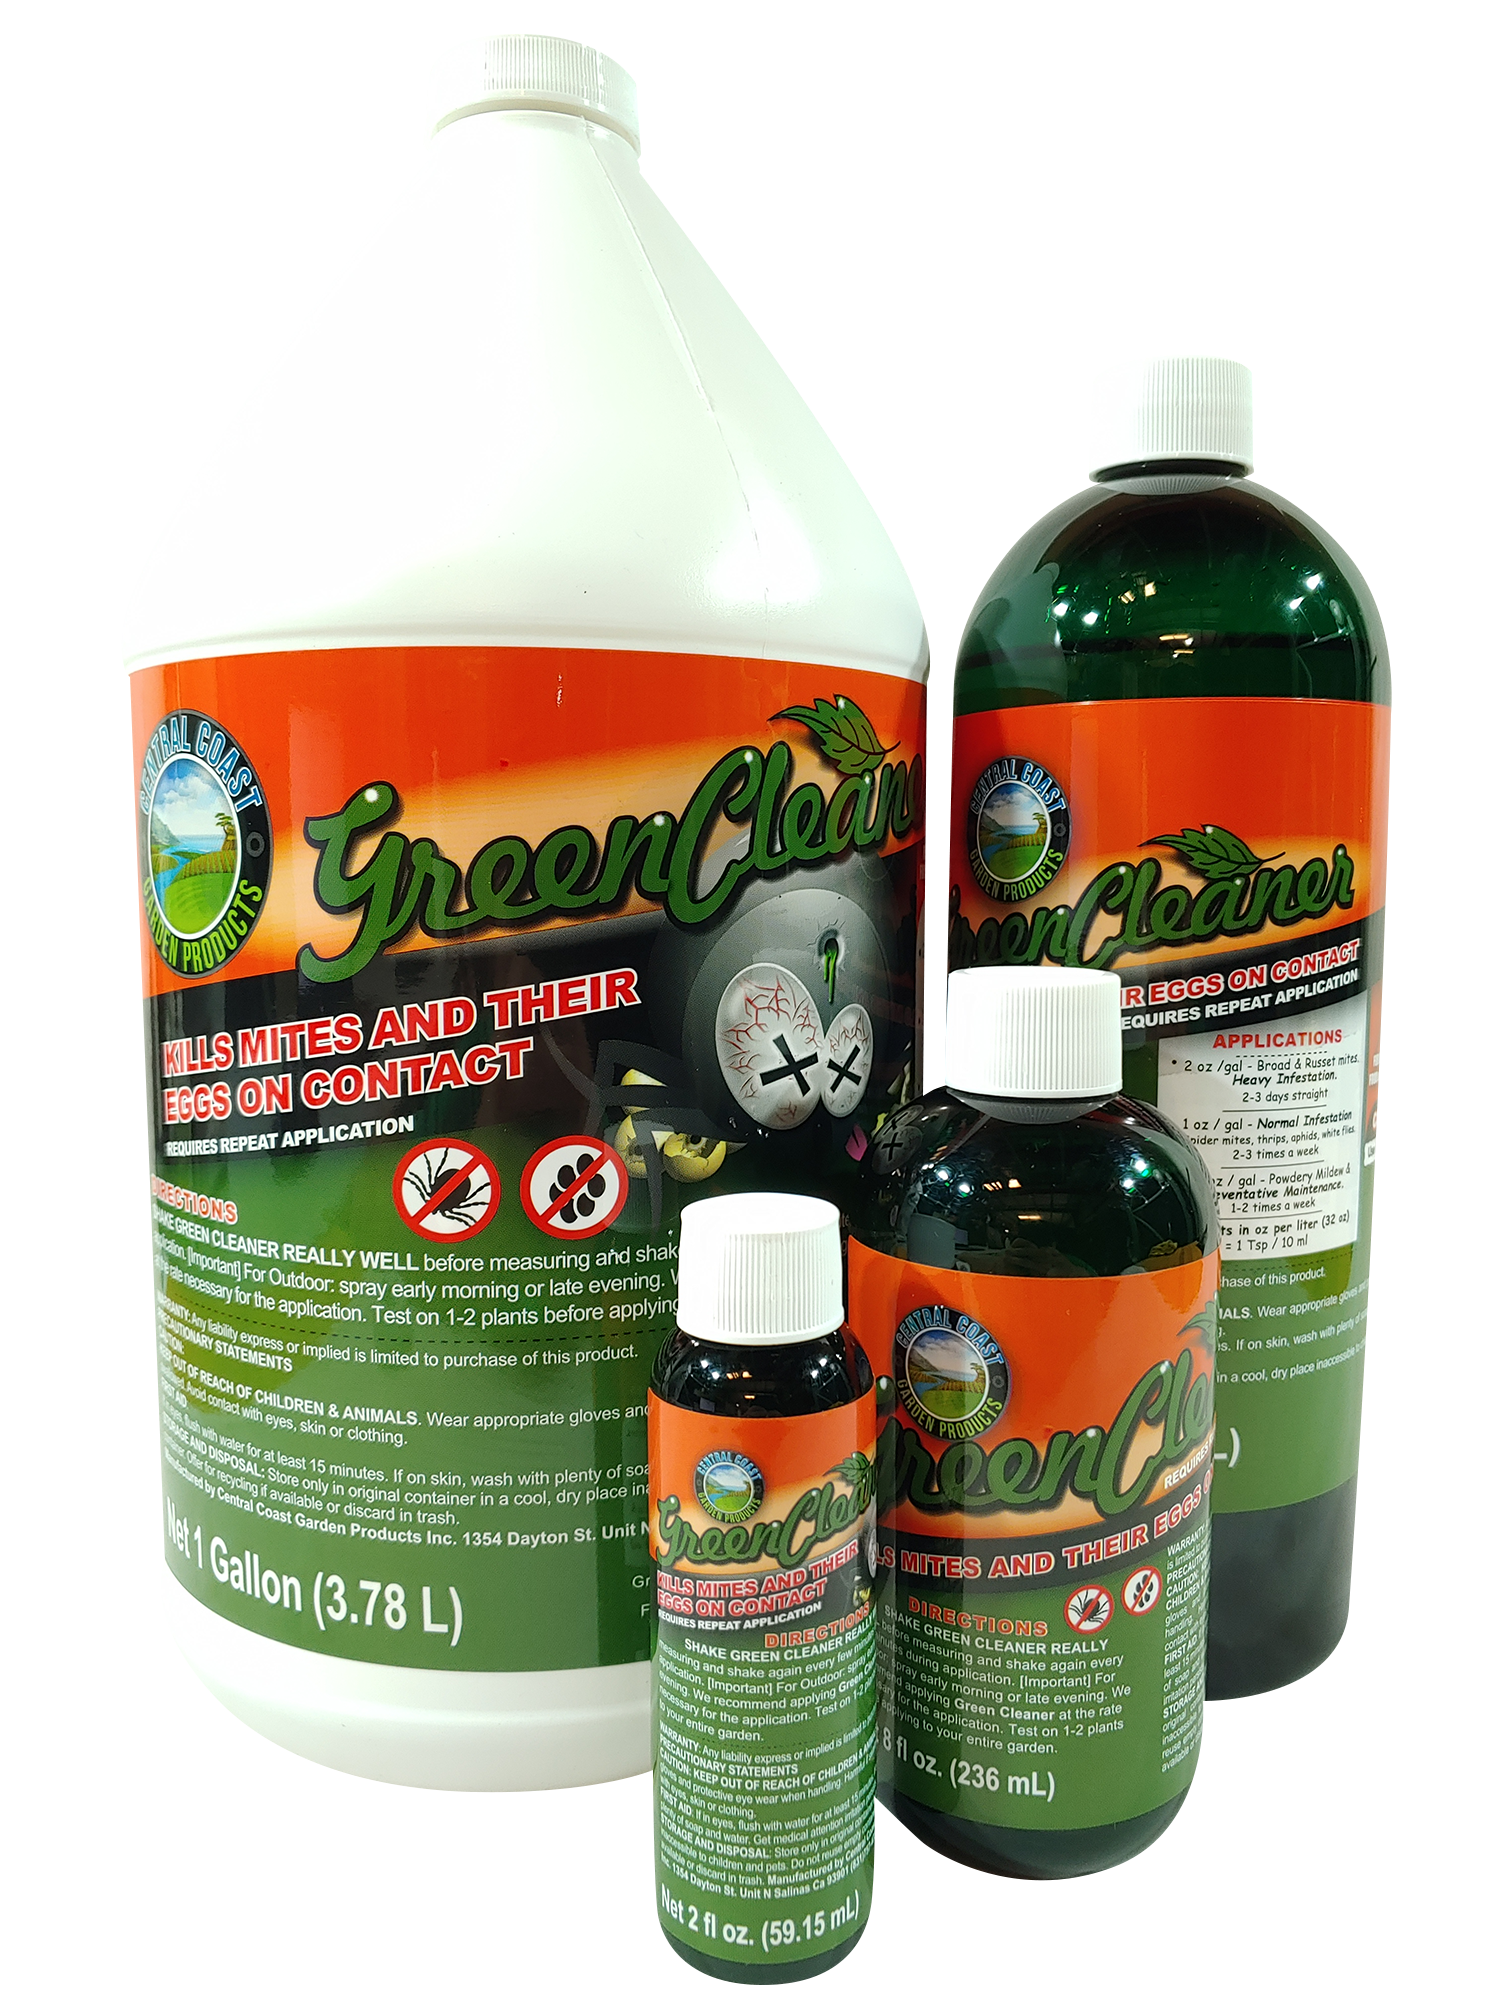 Stop-Kill-Control Spider Mites, Green Cleaner